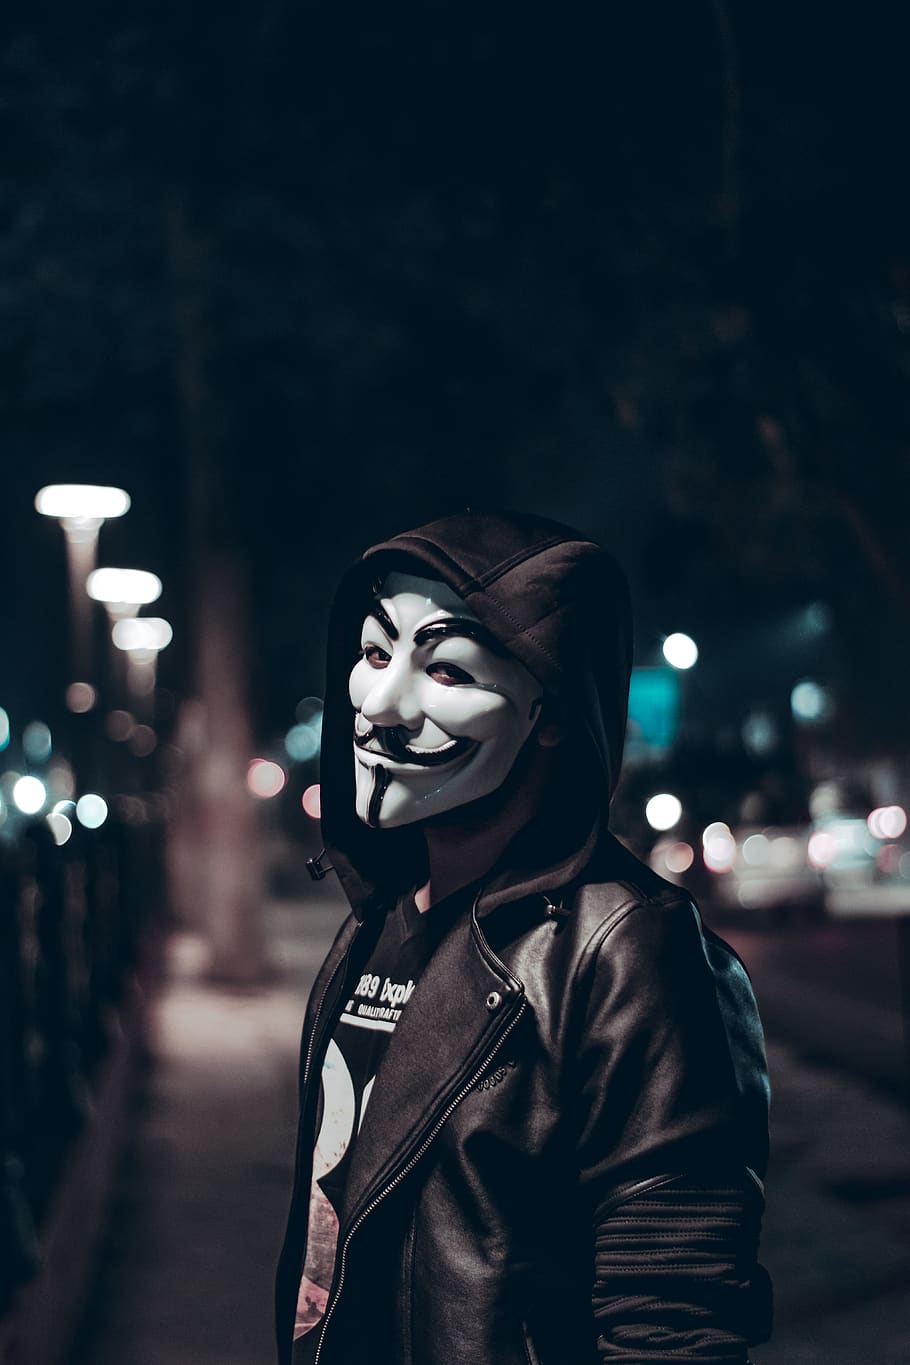 Person Wearing Guy Fawkes Mask, black leather jacket, blur, city lights, HD wallpaper